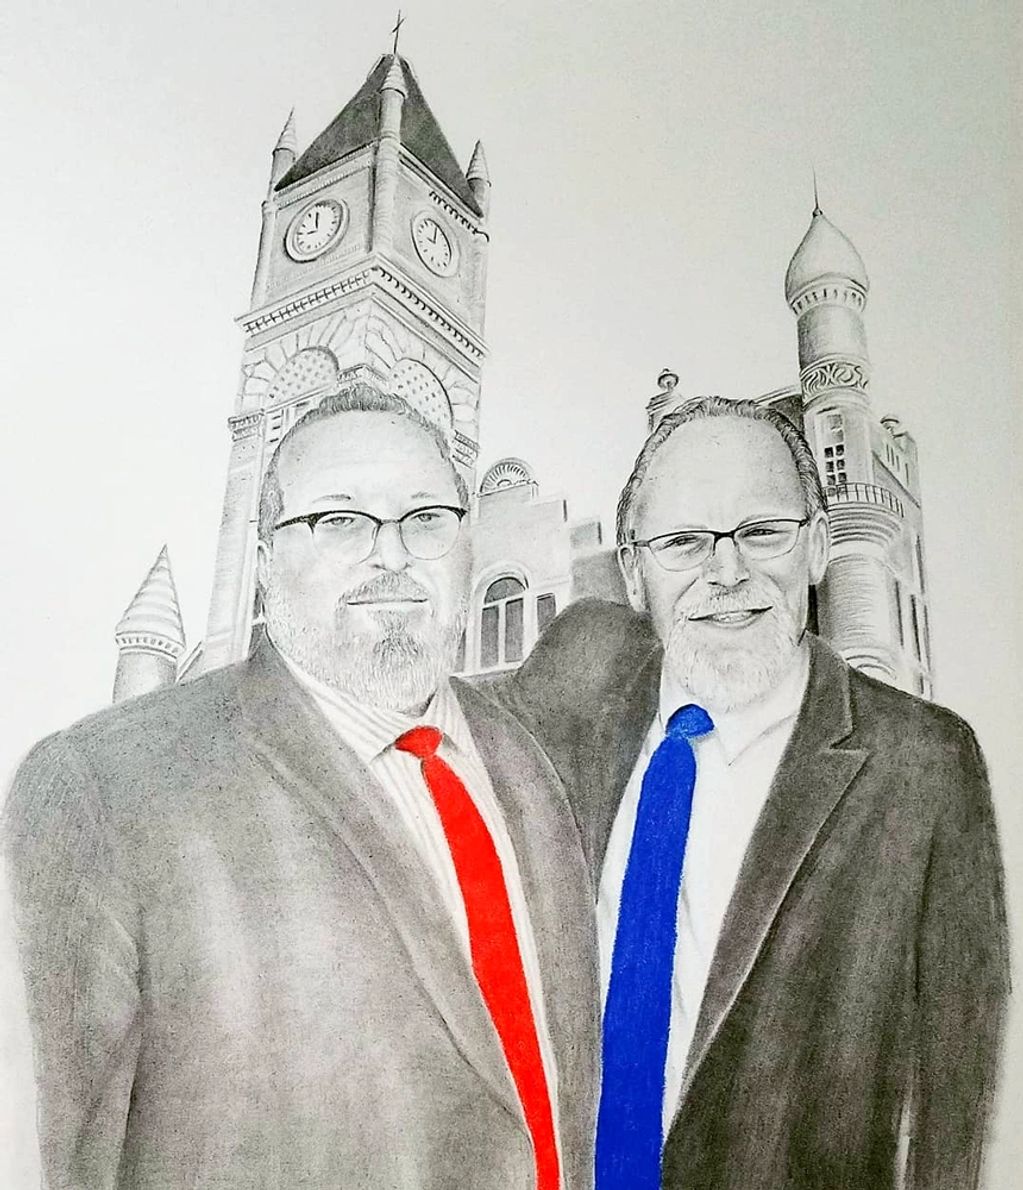 pencil drawing of two lawyers standing together in front of courthouse